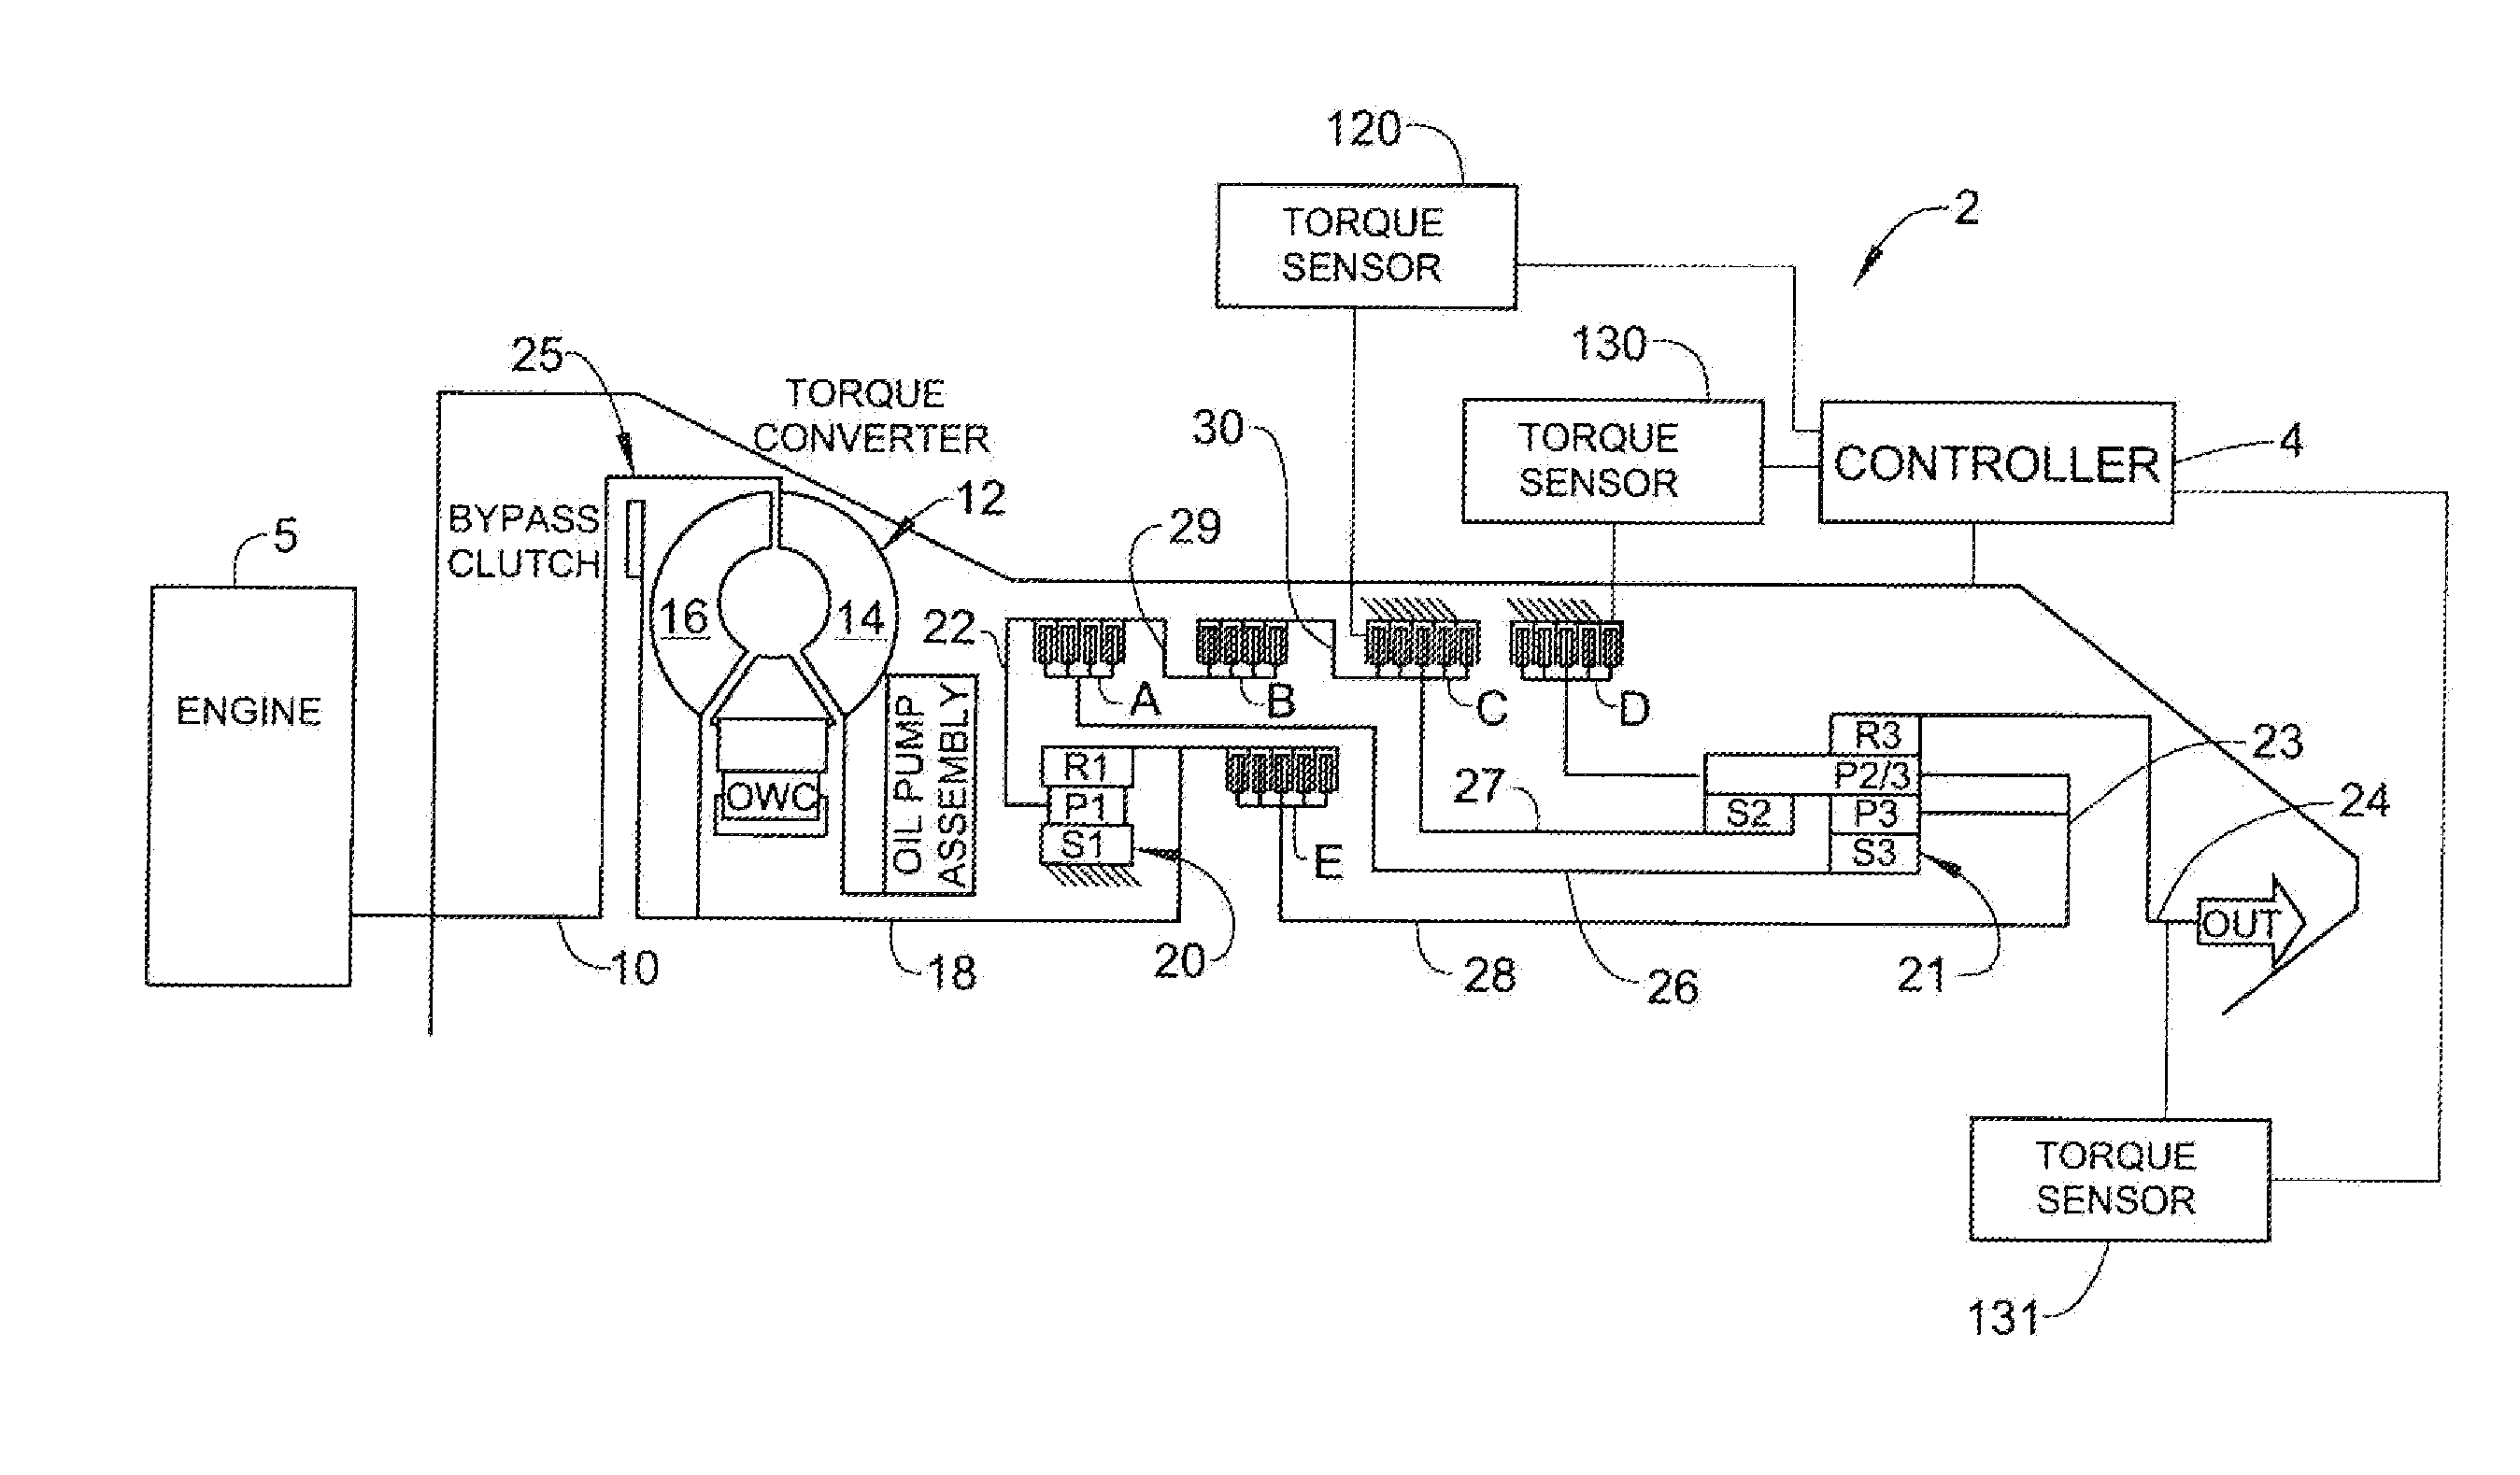 Closed-Loop Torque Phase Control for Shifting Automatic Transmission Gear Ratios Based on Friction Element Load Estimation